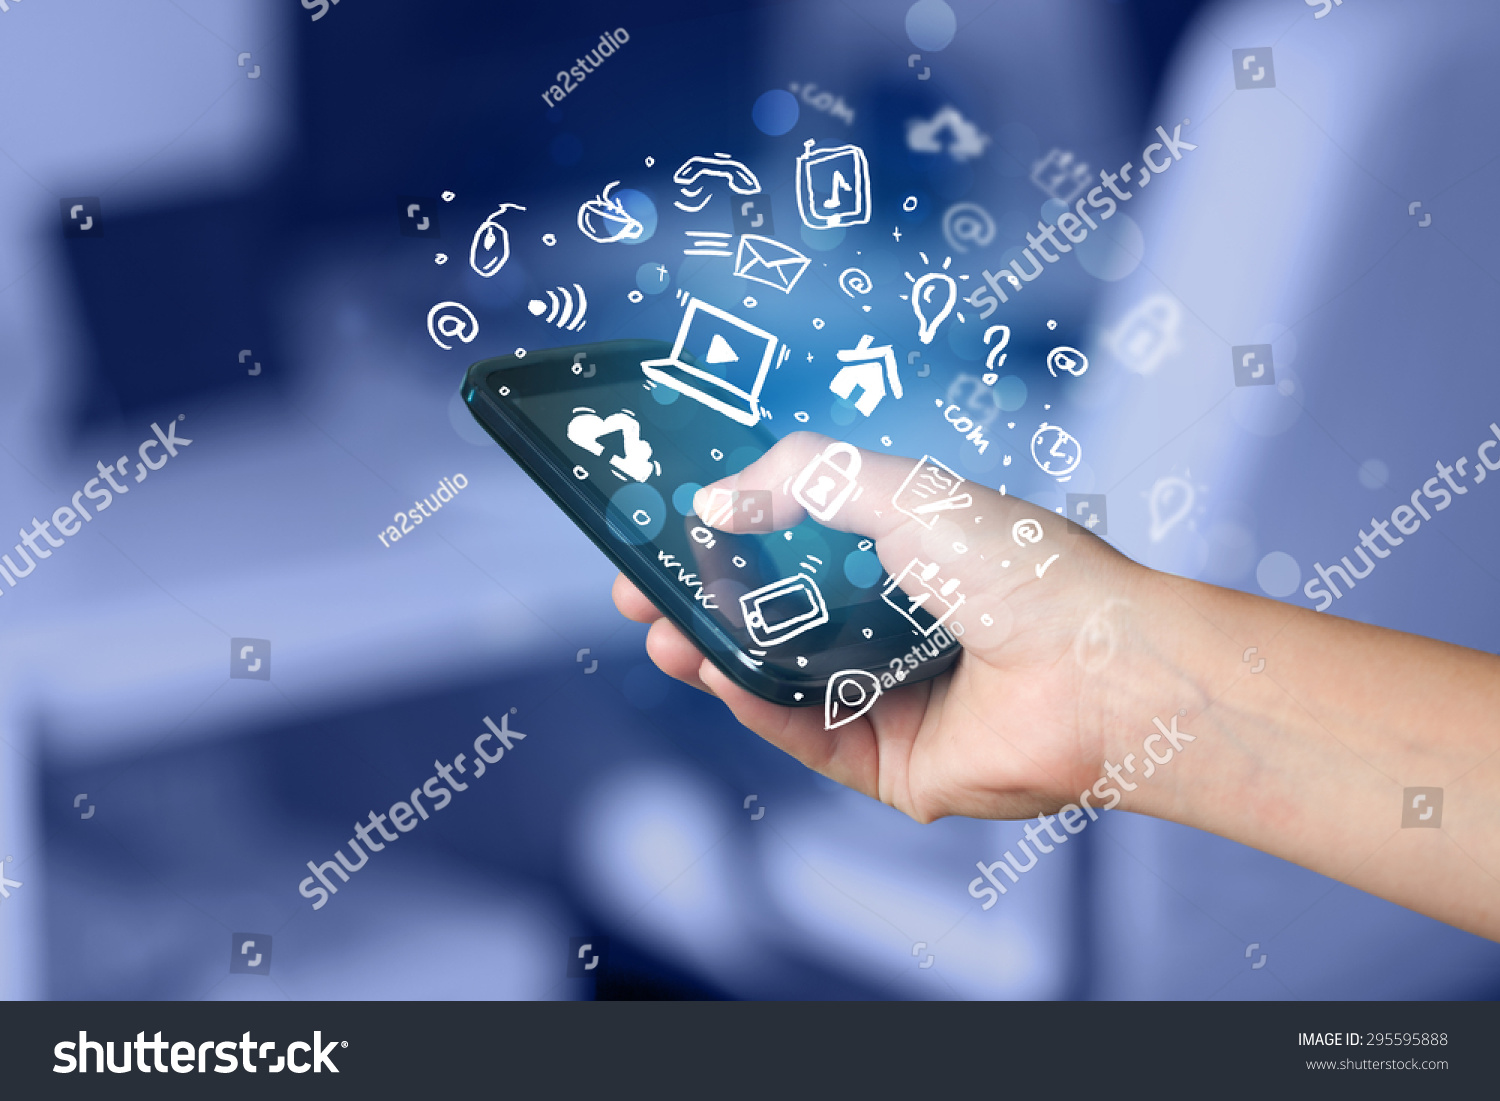 Hand holding smartphone with media icons and symbol collection #295595888